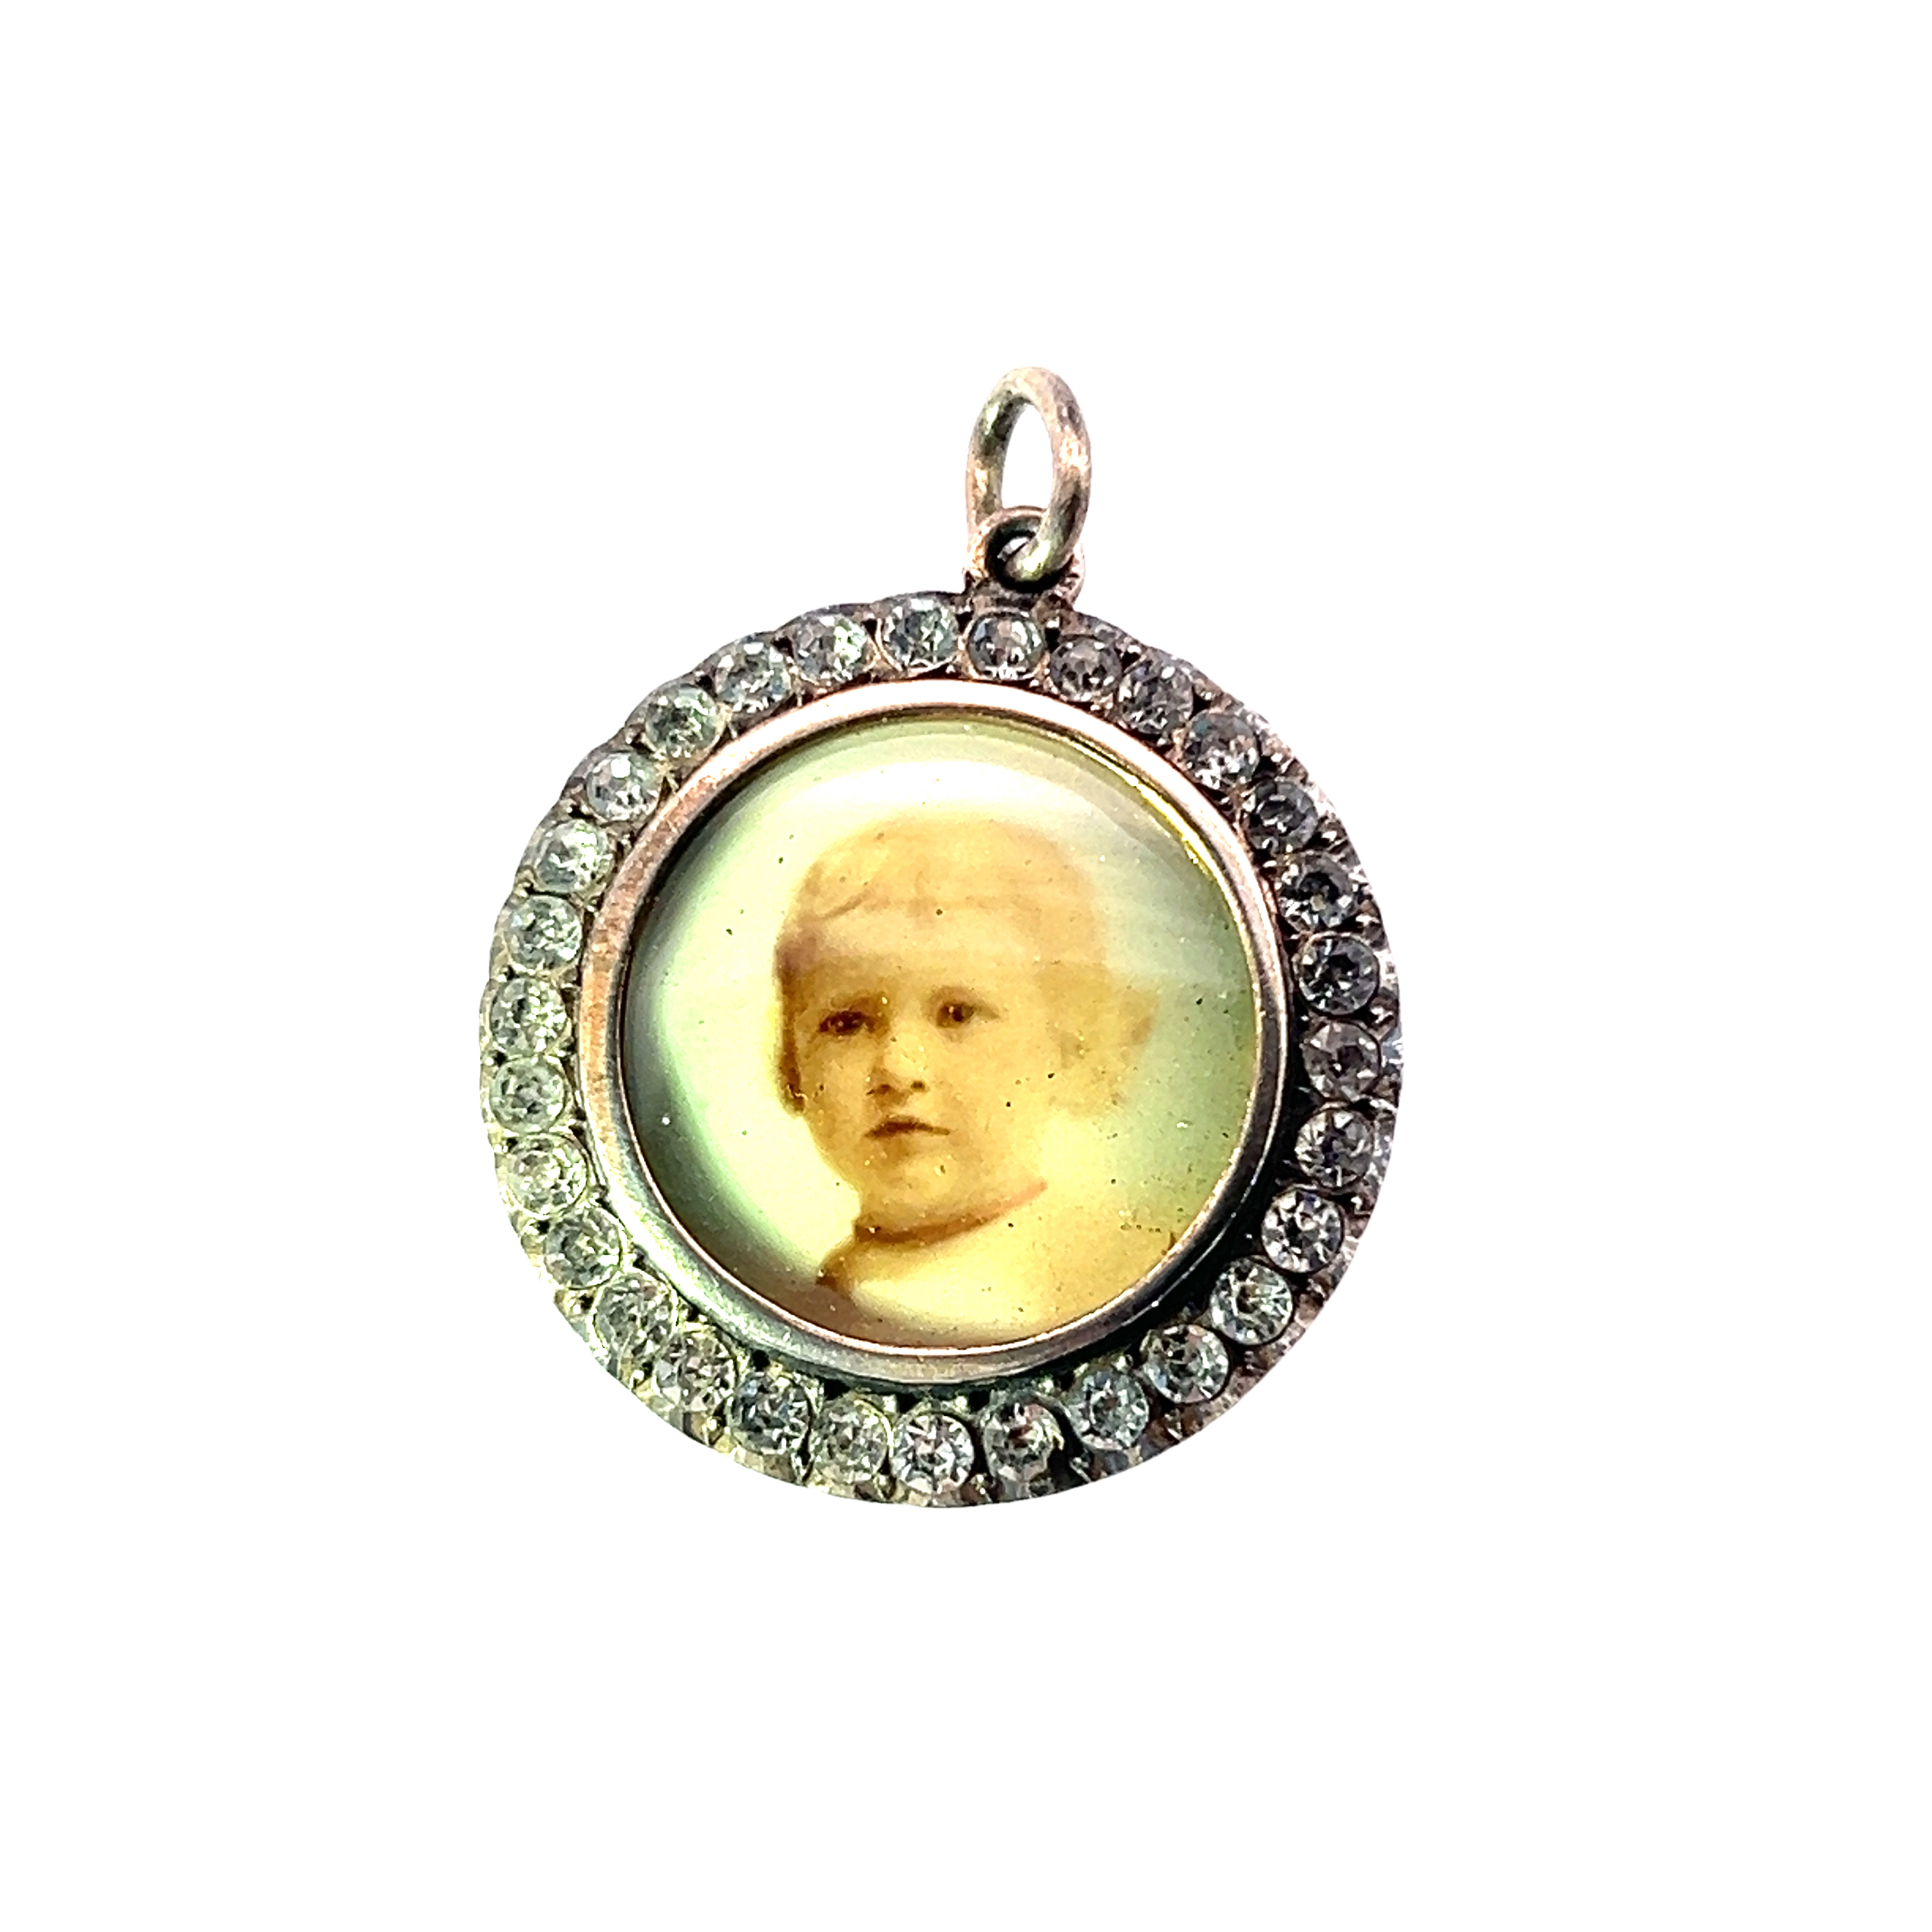 Beautiful Silver and Paste Antique Locket